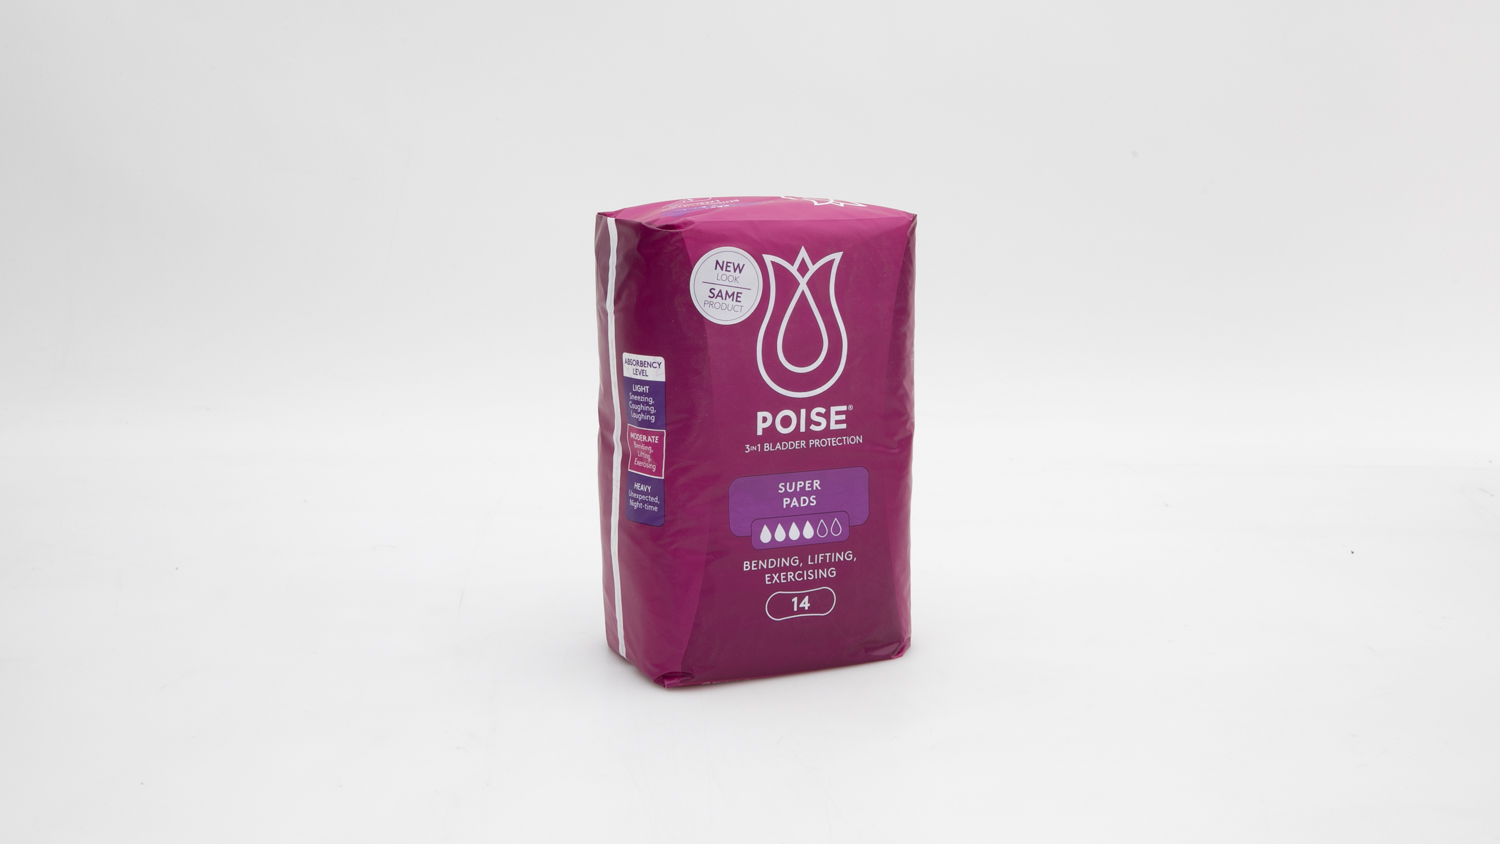 Poise Super Pads carousel image